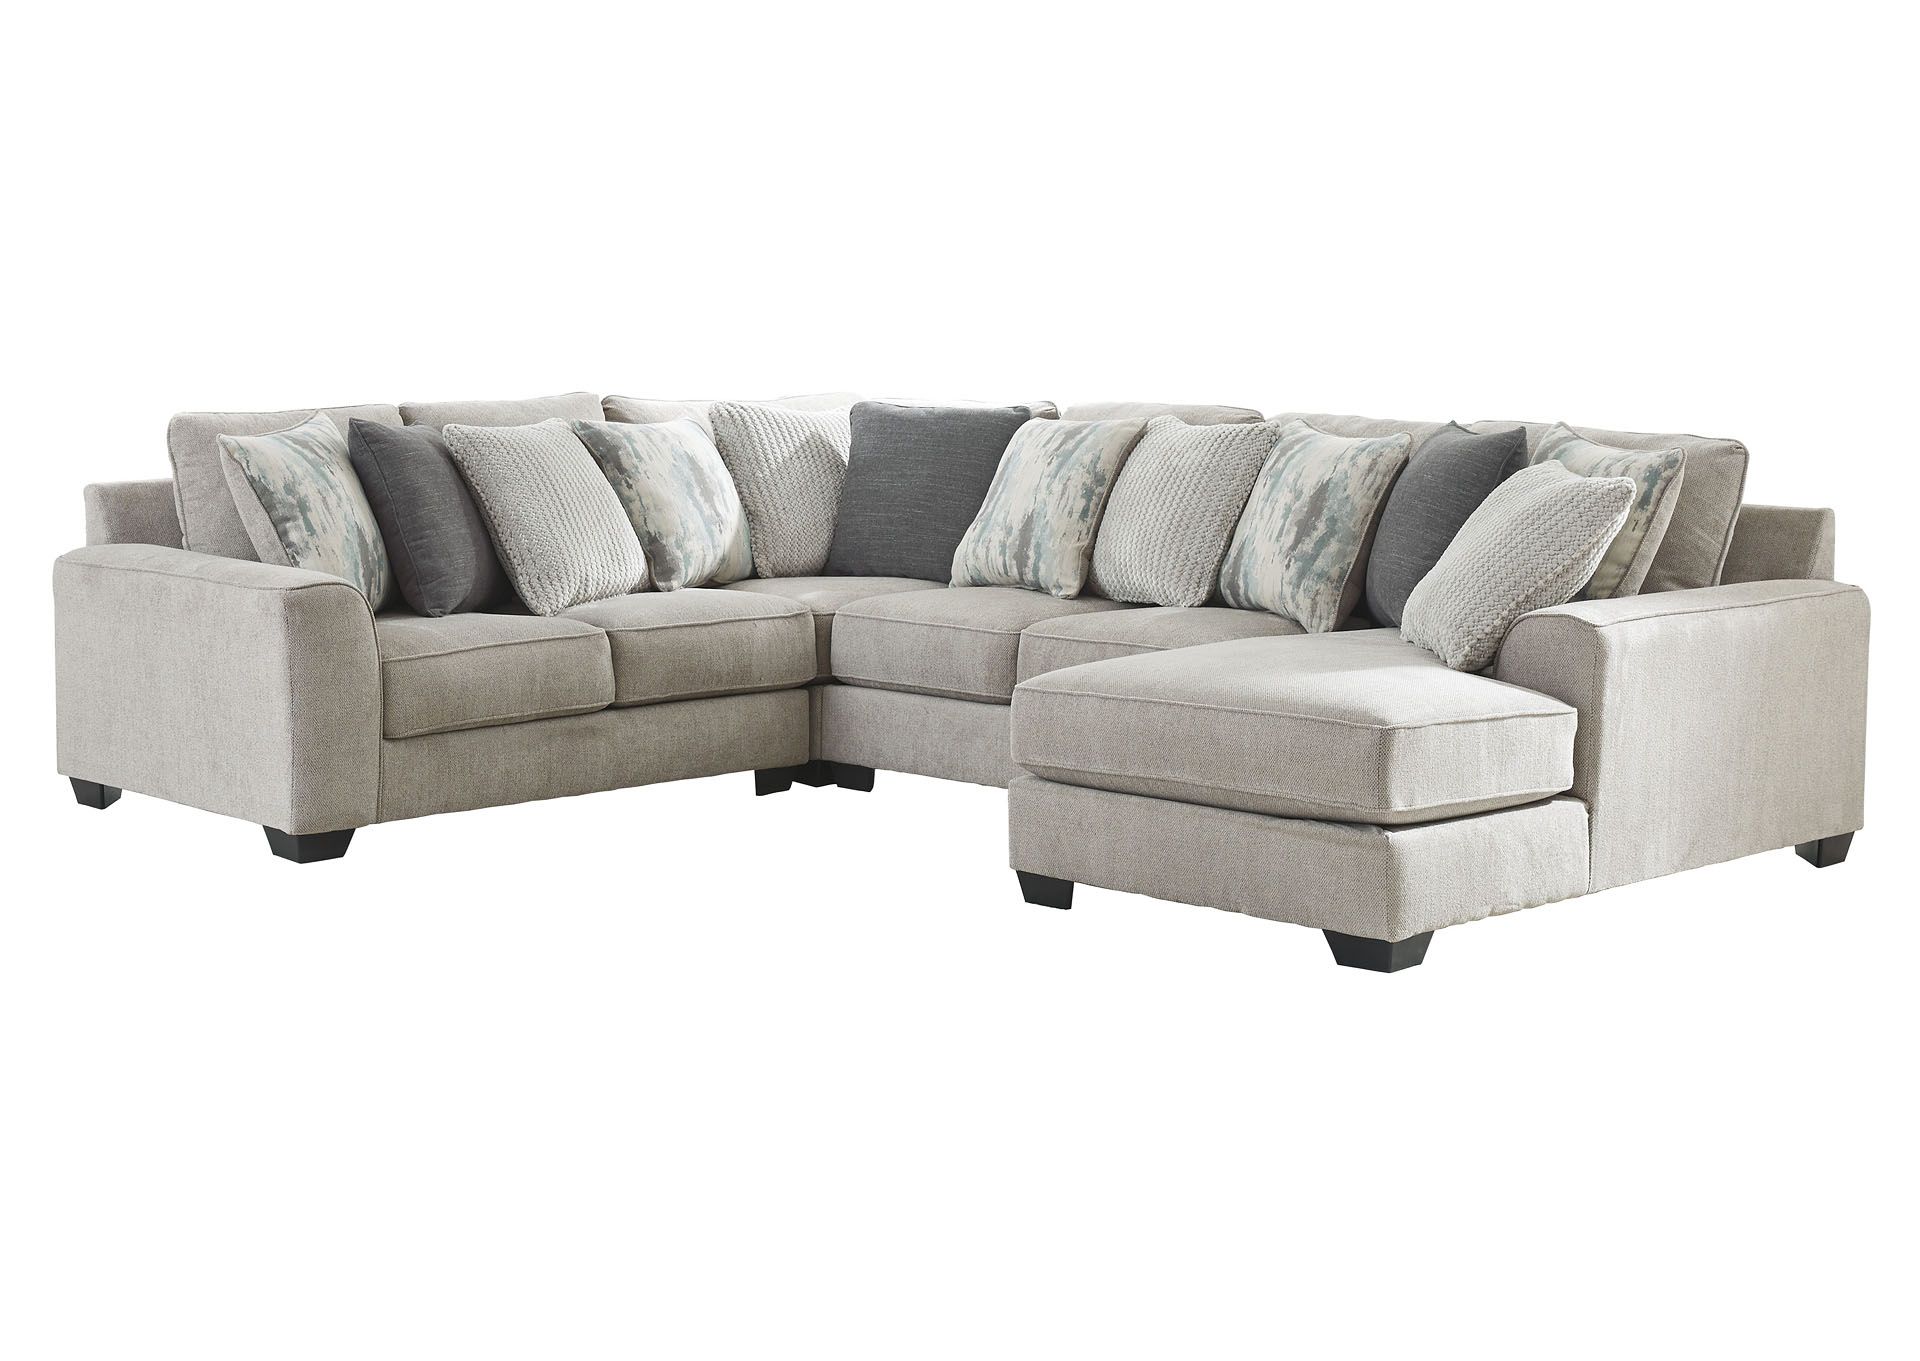 Ardsley 4 Piece Sectional With Chaise Ashley Furniture Homestore With Regard To Left Or Right Facing Sleeper Sectionals (Gallery 1 of 20)